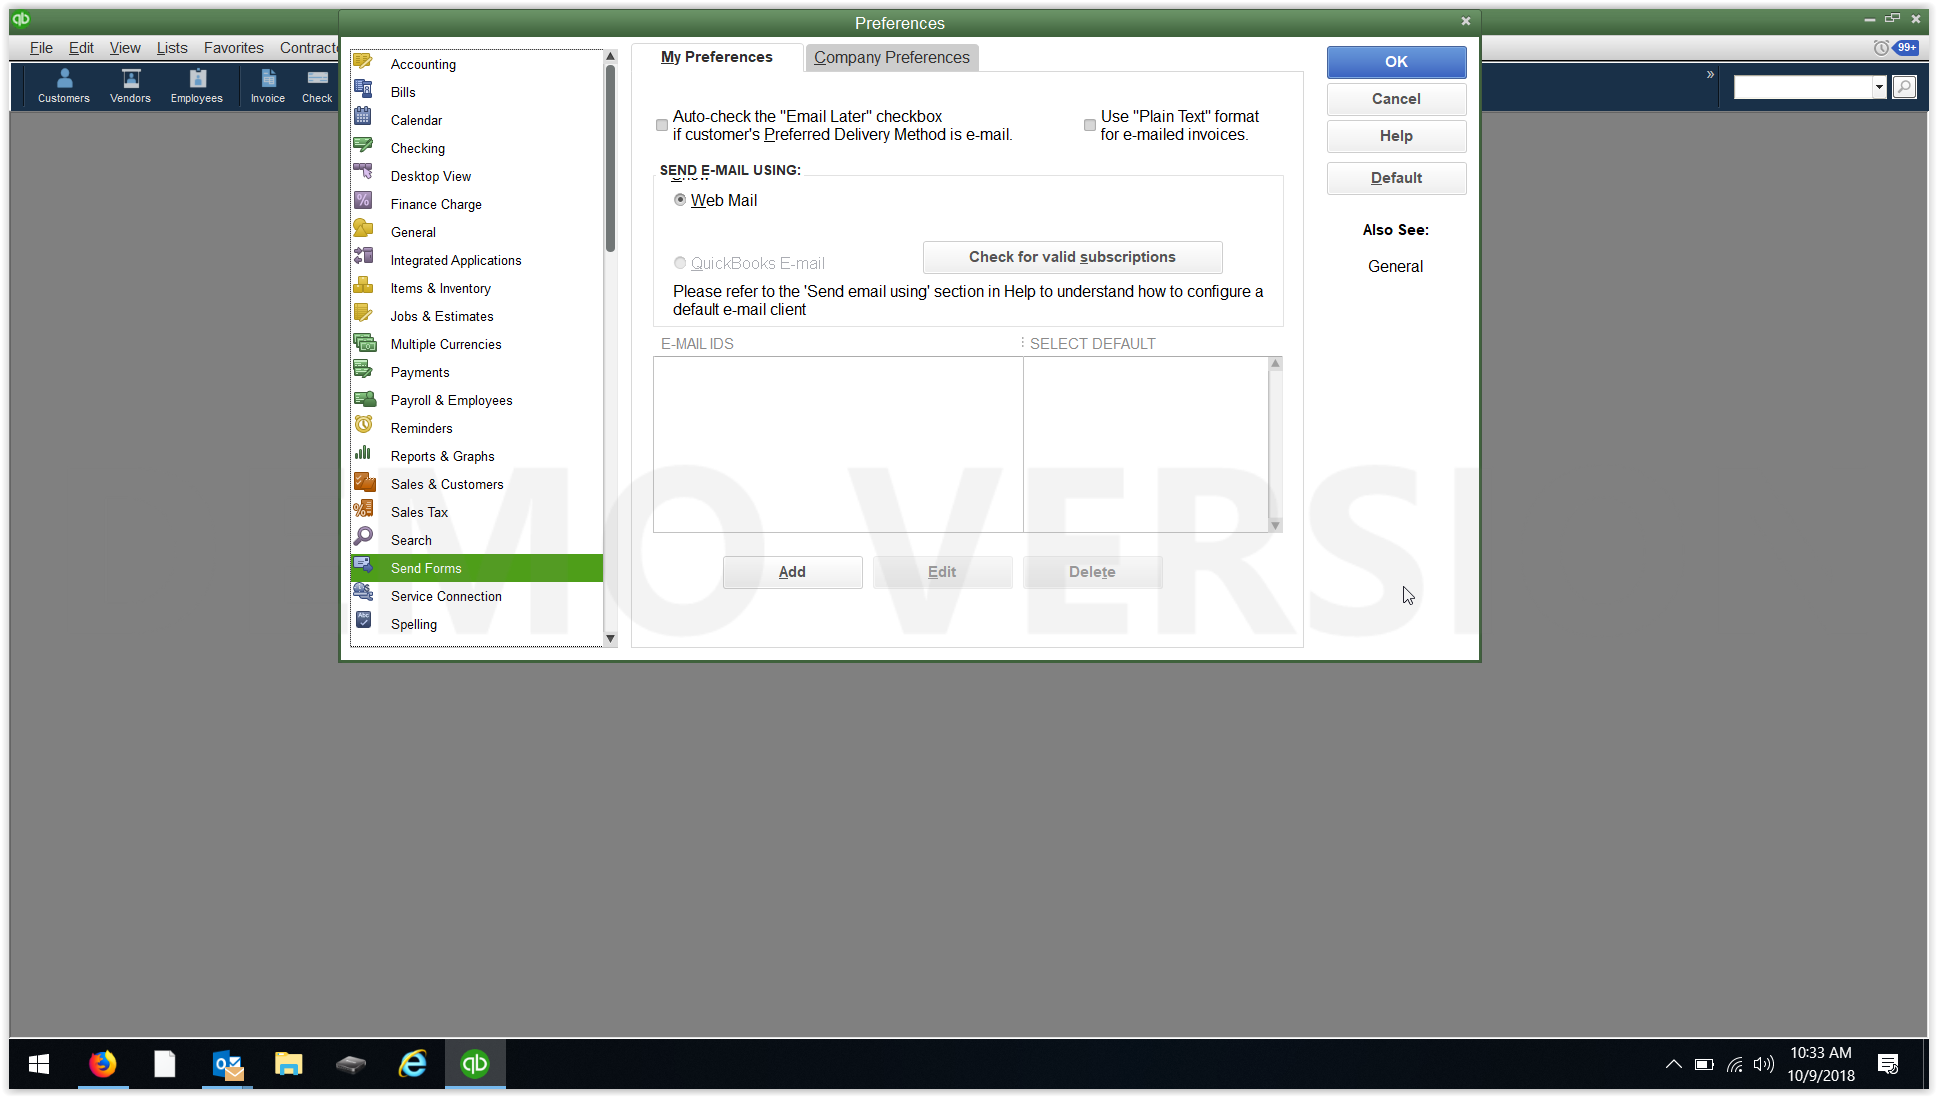 Send Forms On Quickbooks For Mac 2016?